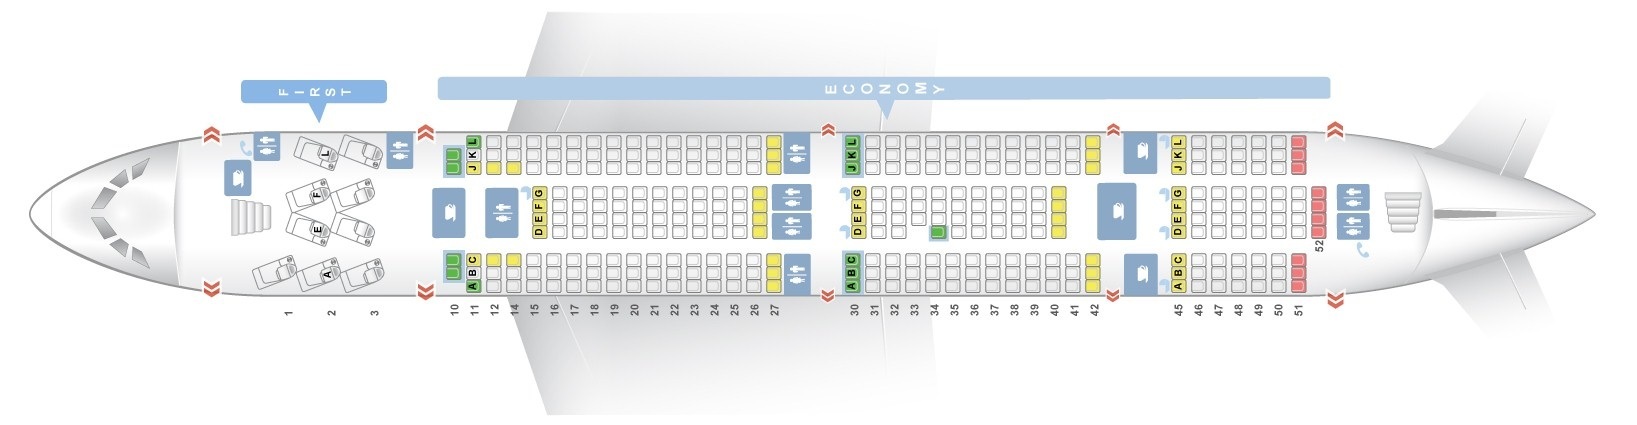 Lufthansa Airbus Industrie A380 800 Seating Chart